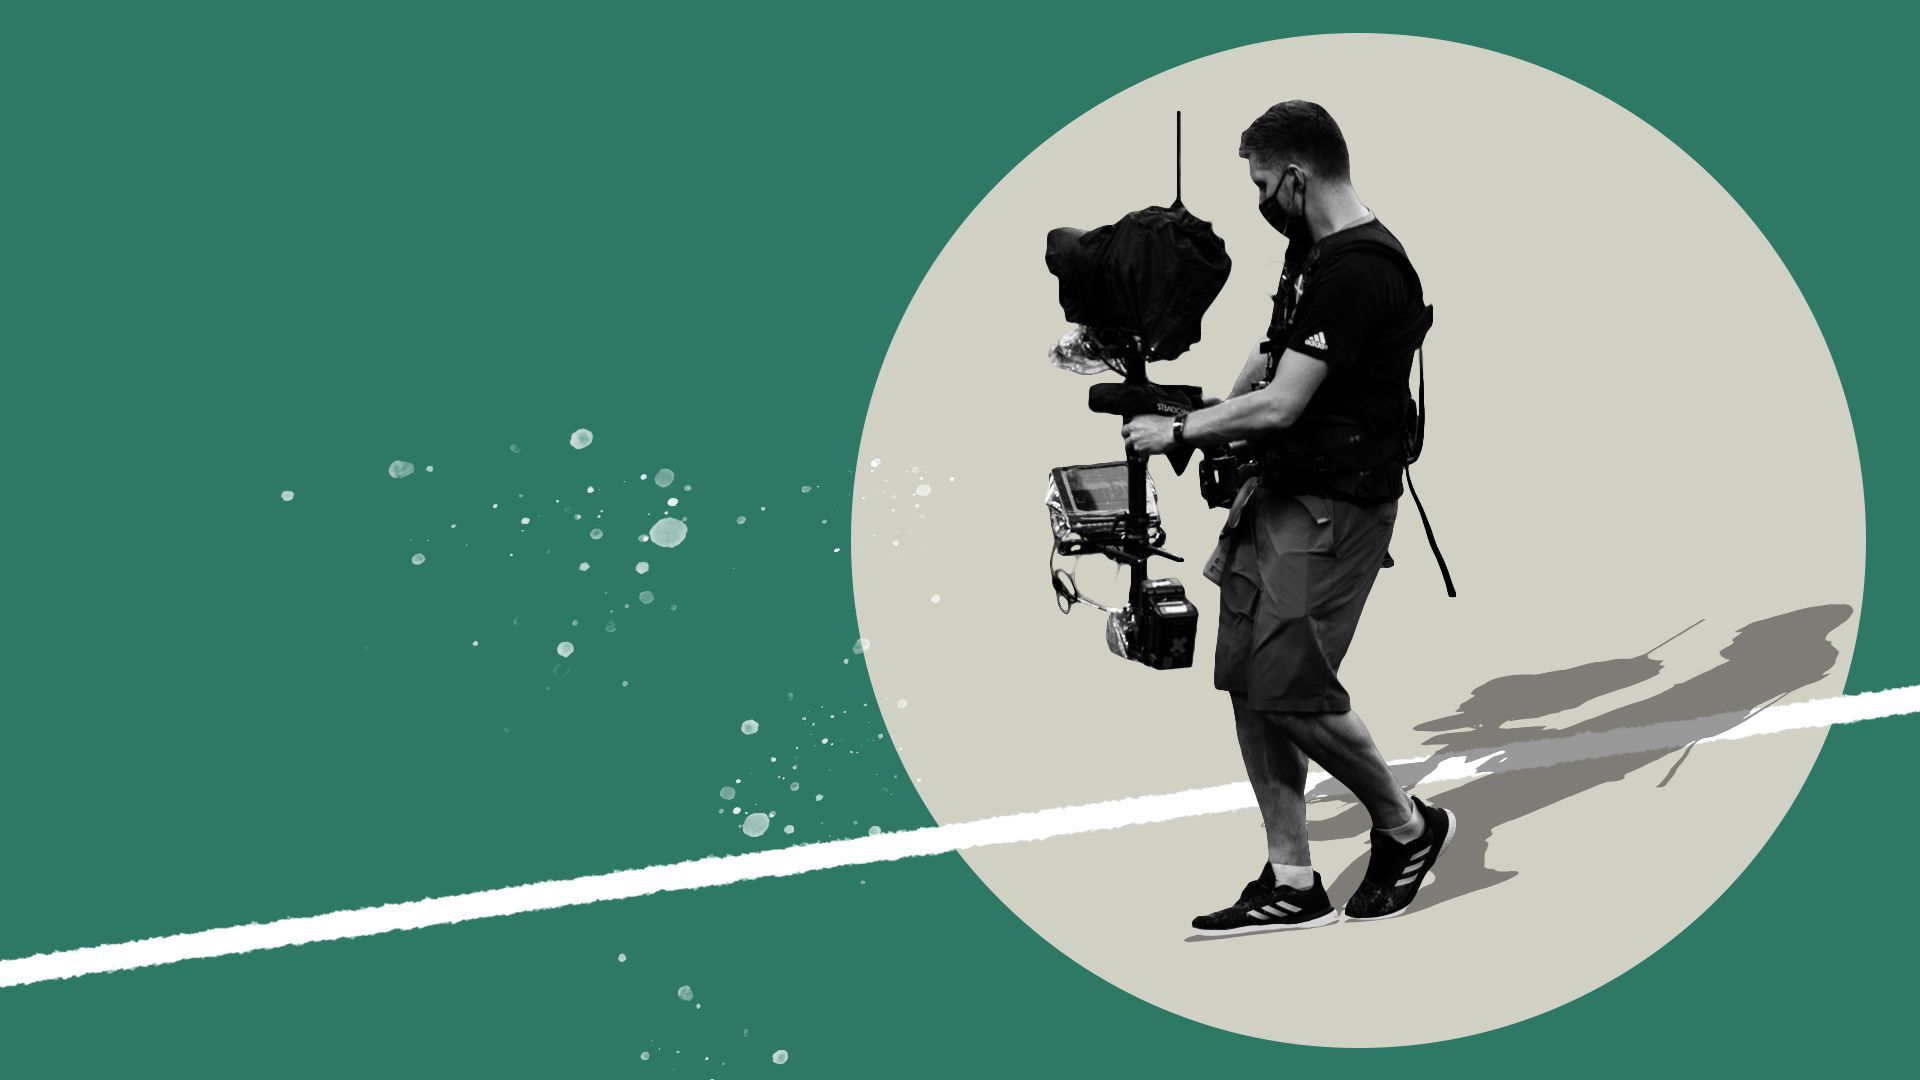 Photo illustration of a camera man against an abstract background